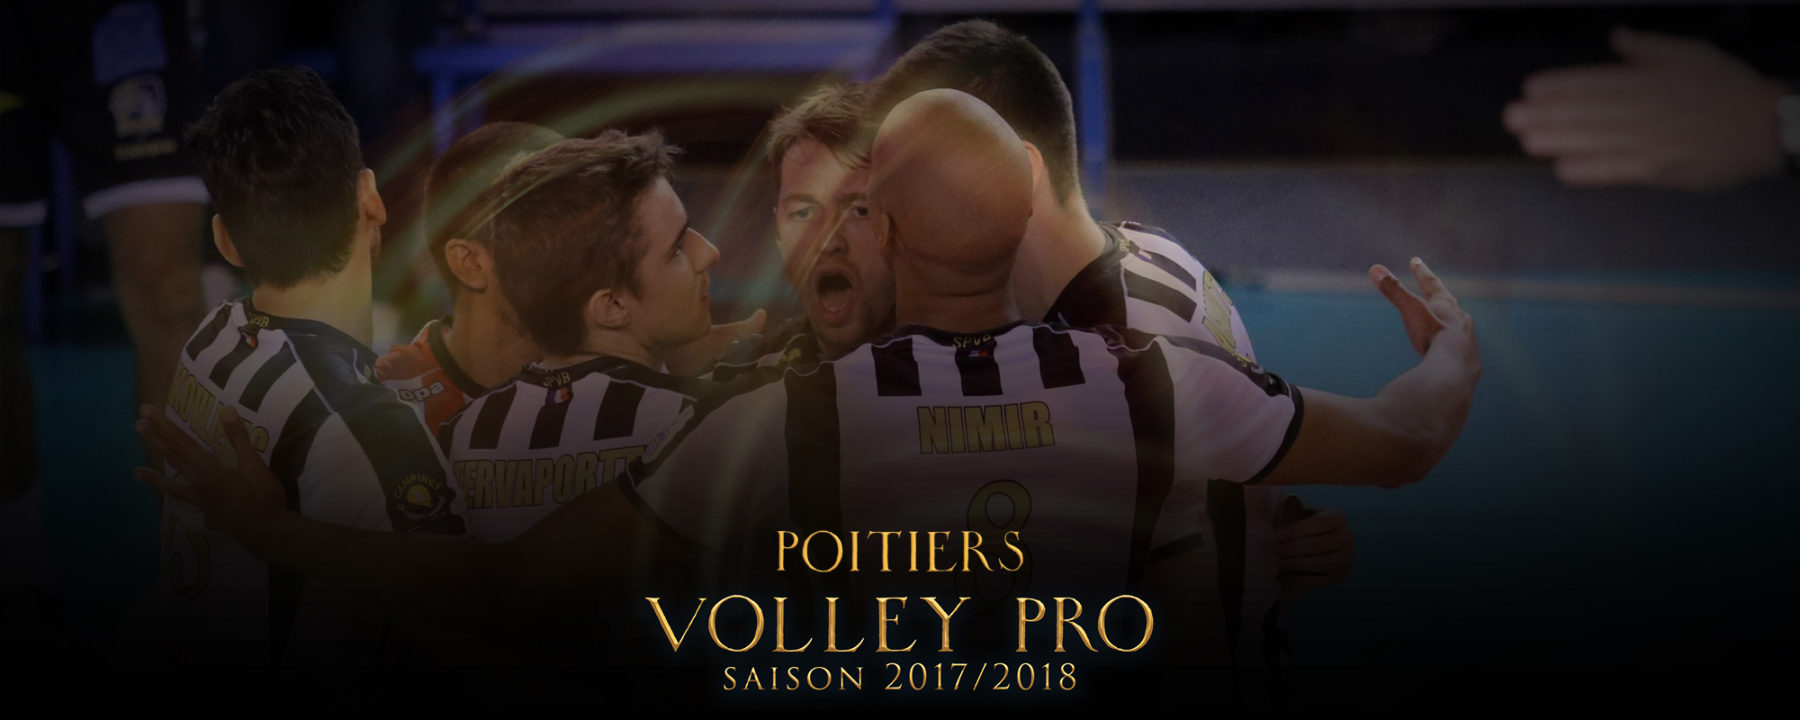 Ligue A Week 1 Recap: Poitiers-Ajaccio Thriller and Greg Petty Injury